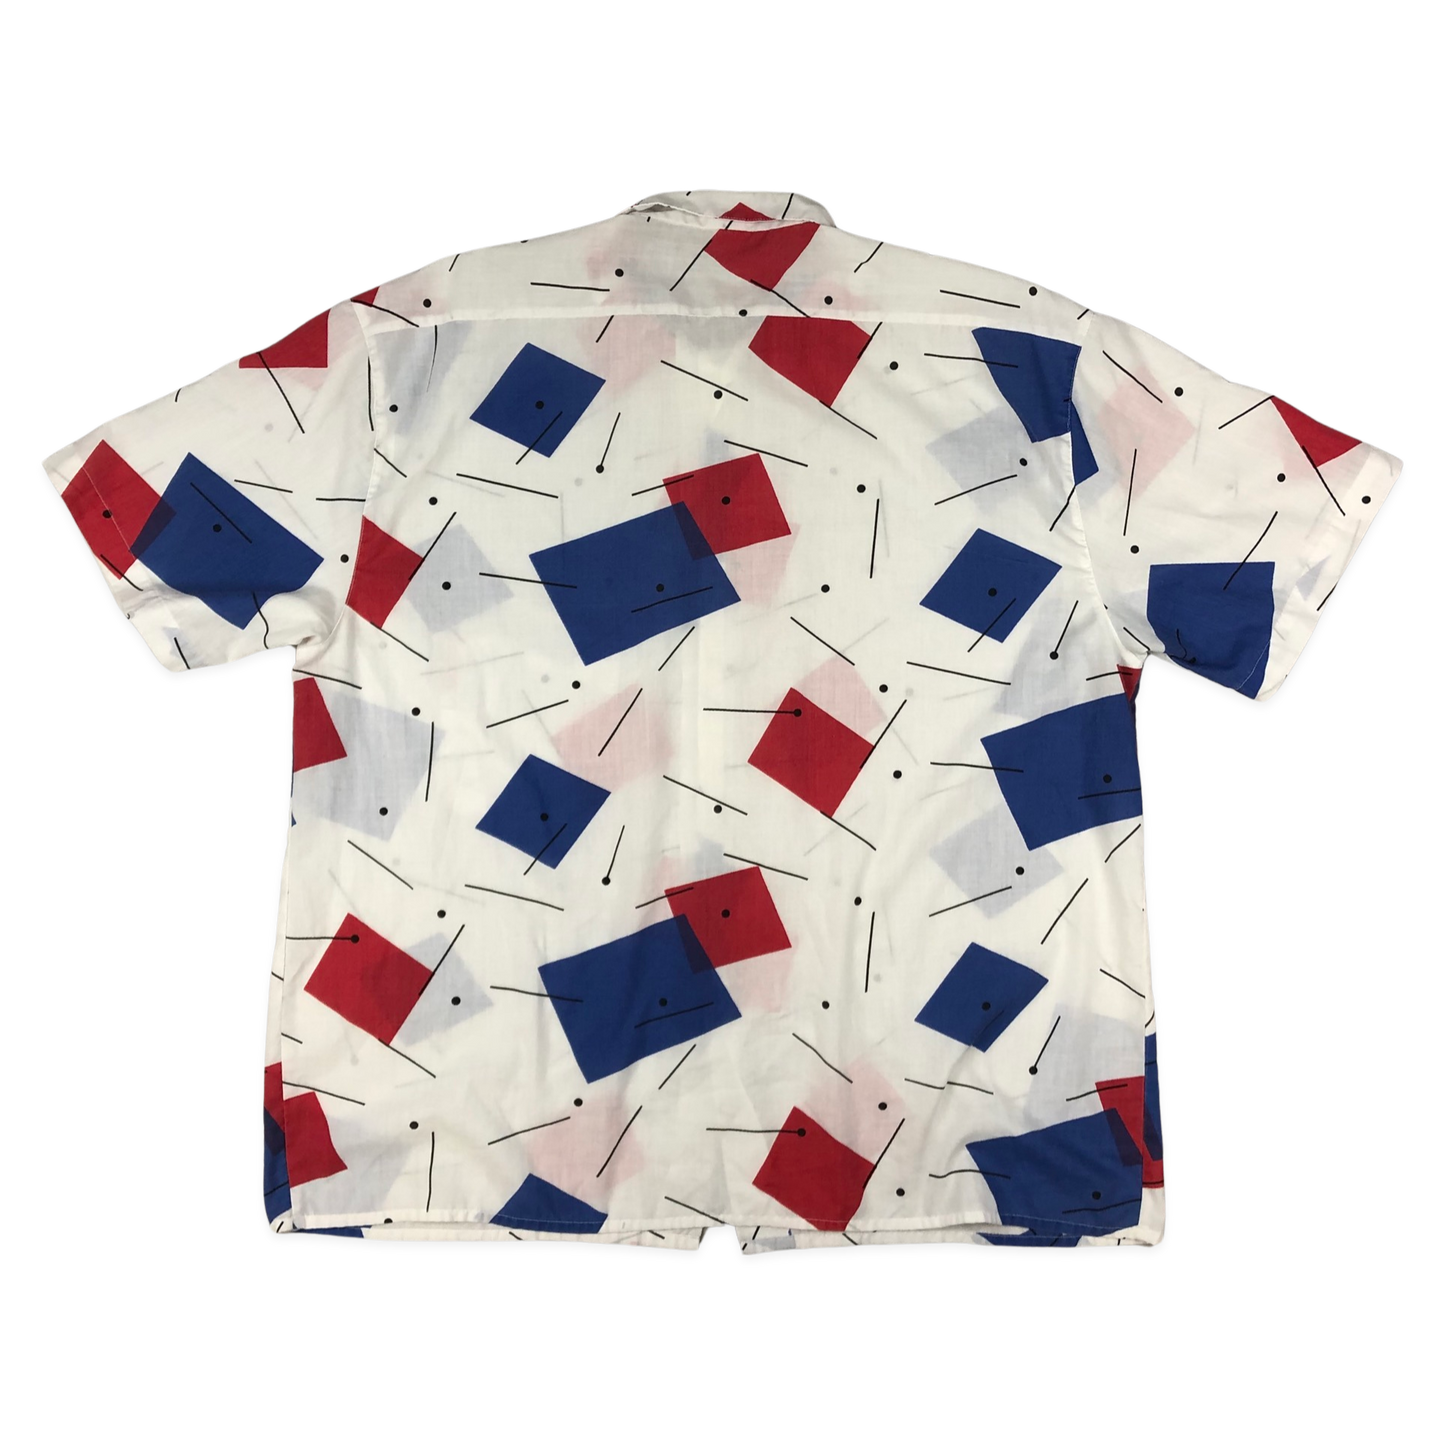 Vintage 80s Red, White, and Blue Abstract Print Shirt XXL